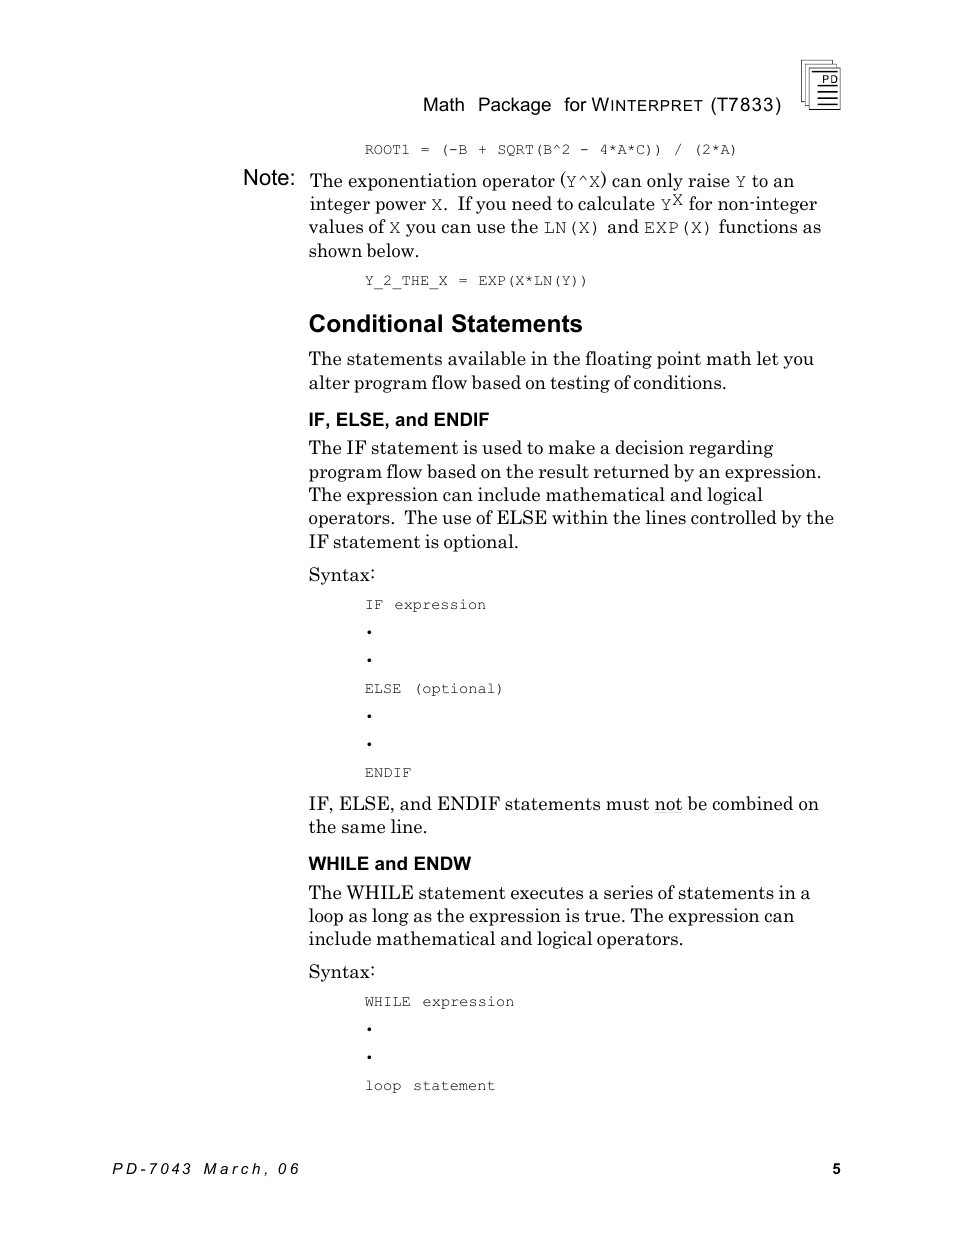 Conditional statements | Rockwell Automation T7833 ICS Regent+Plus Math Package for Winternet User Manual | Page 5 / 26